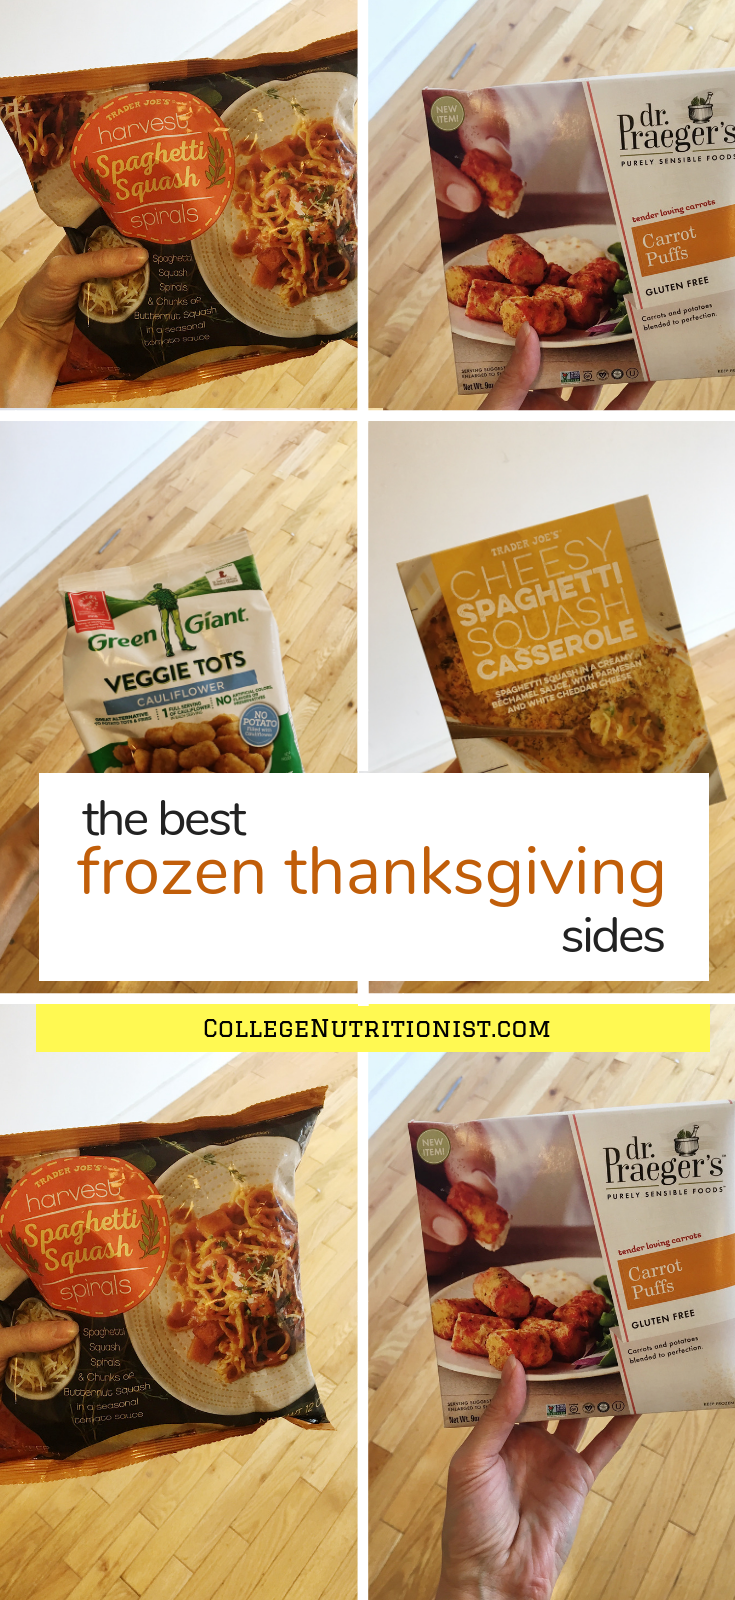 The Best Thanksgiving Sides from the Frozen Section